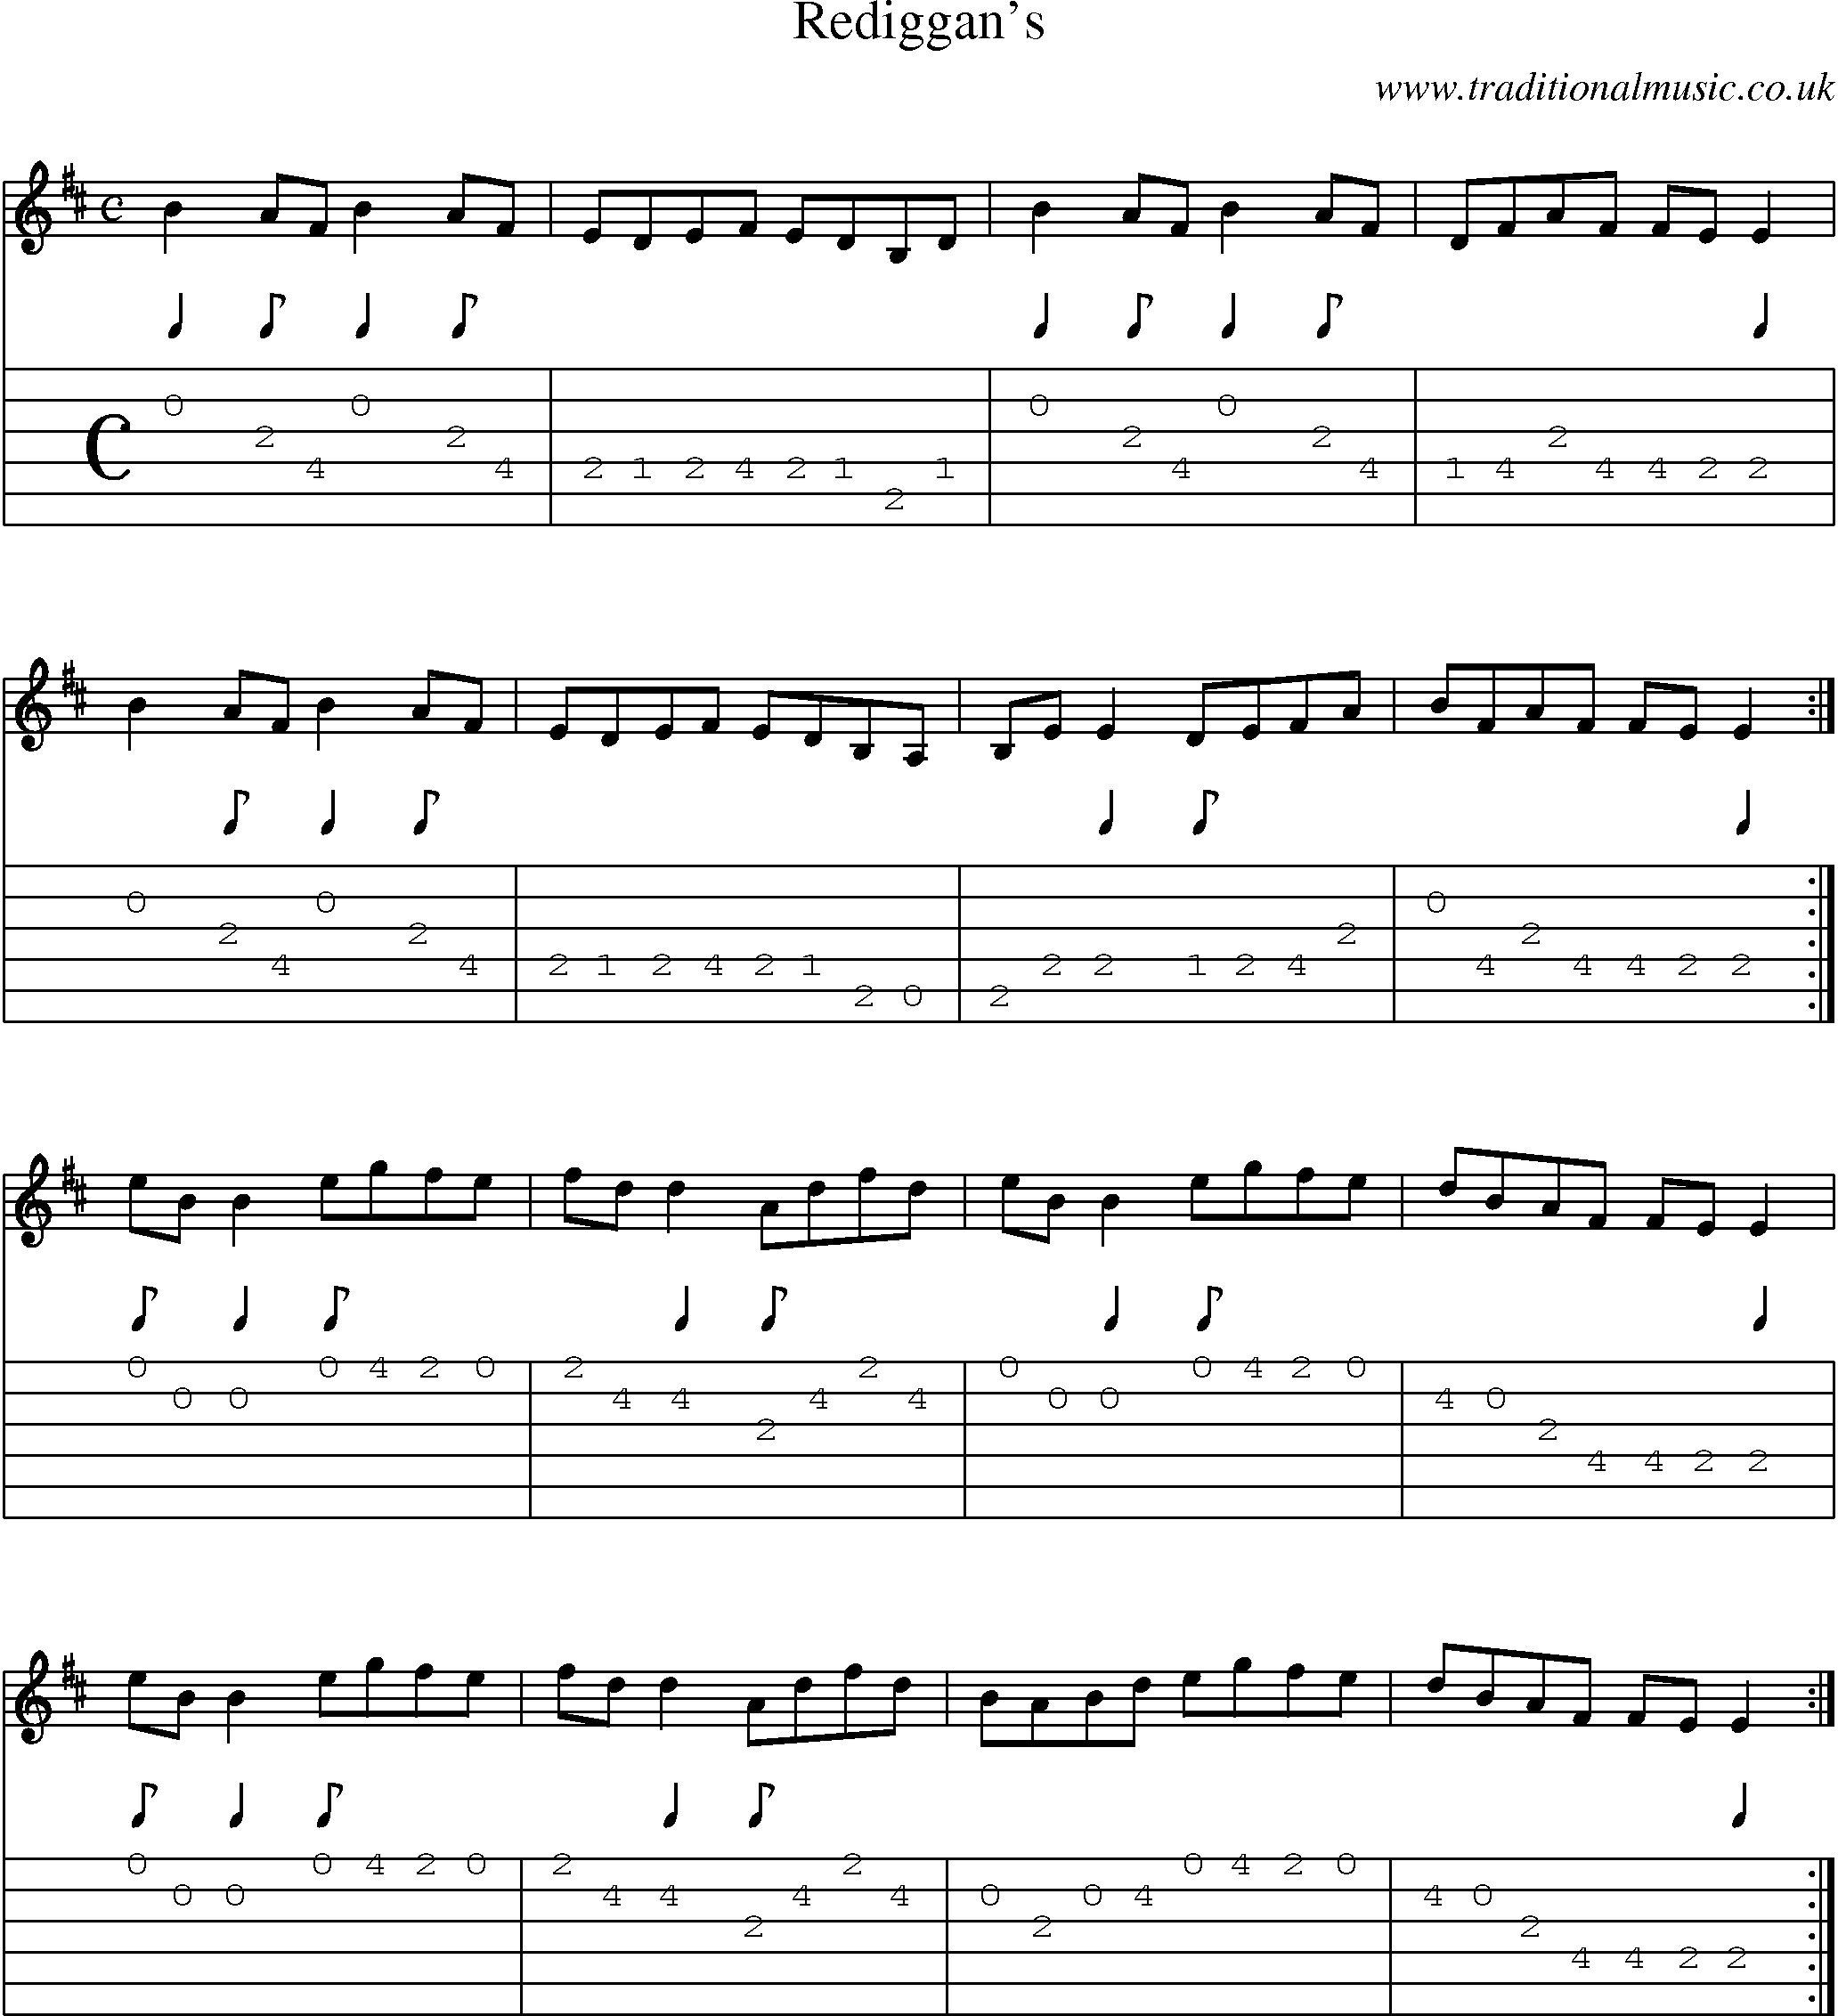 Music Score and Guitar Tabs for Rediggans